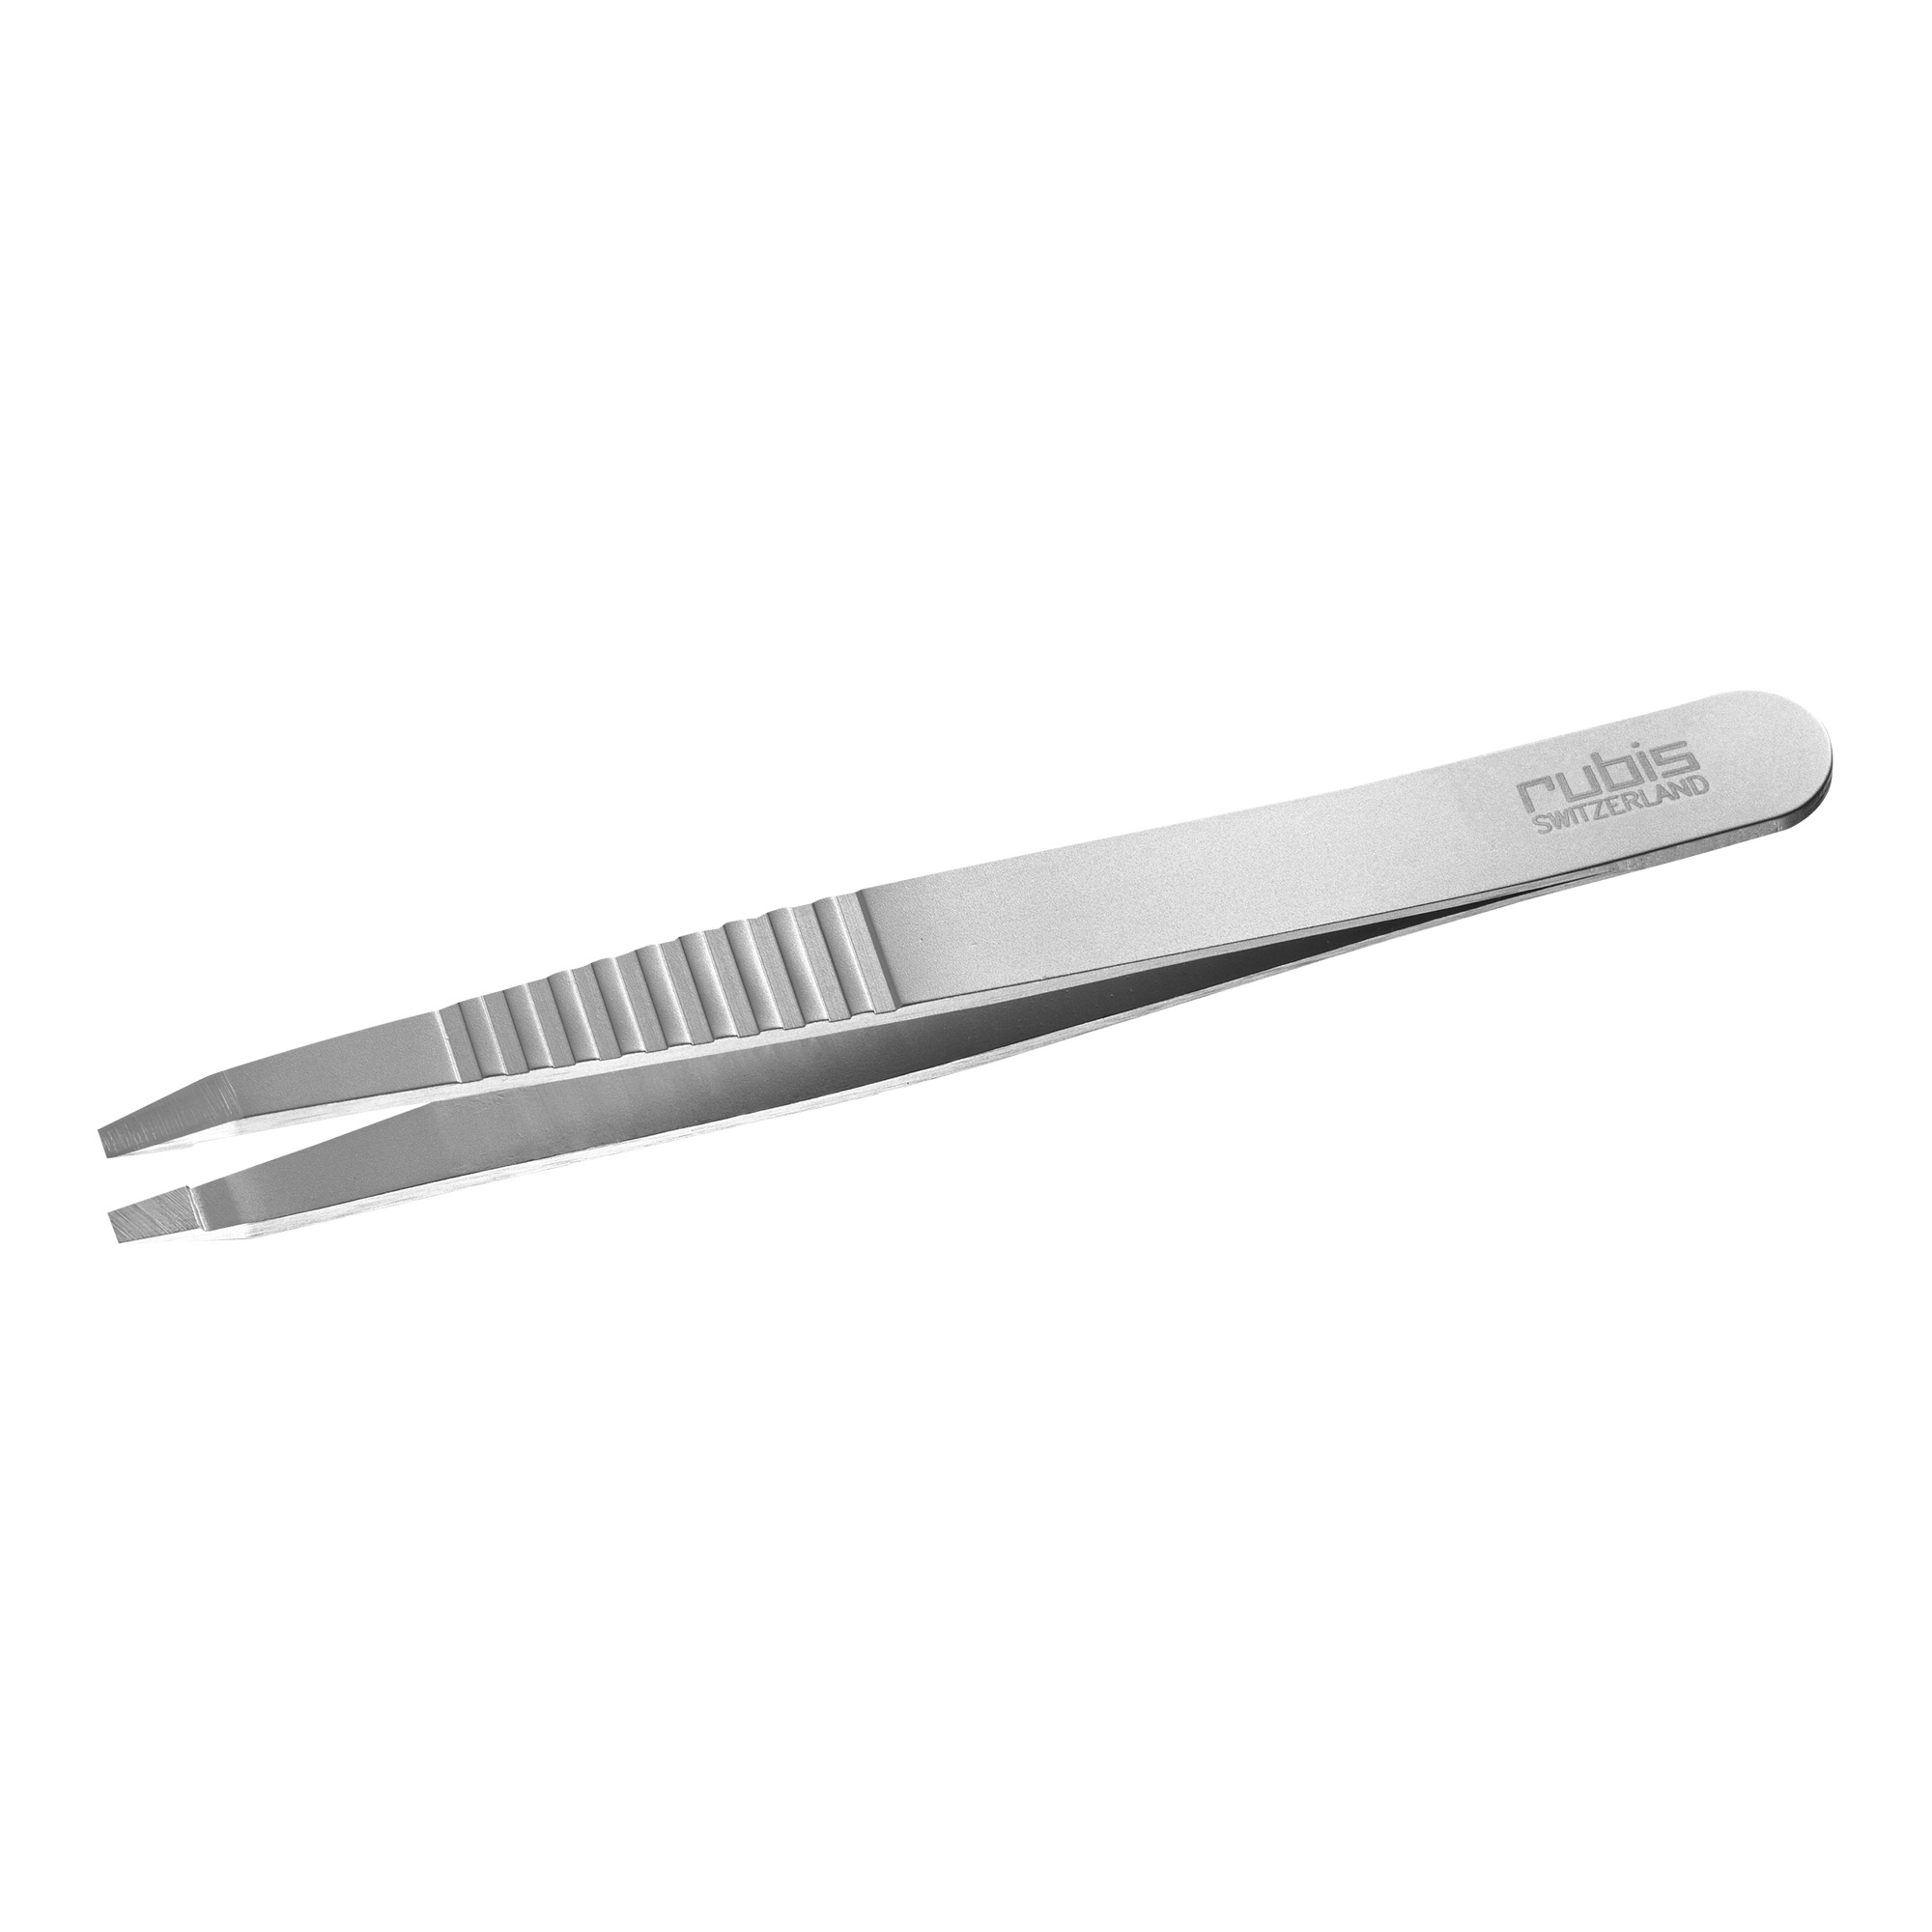 Rubis Pro-Grip Stainless Steel Tweezers with Straight Tip